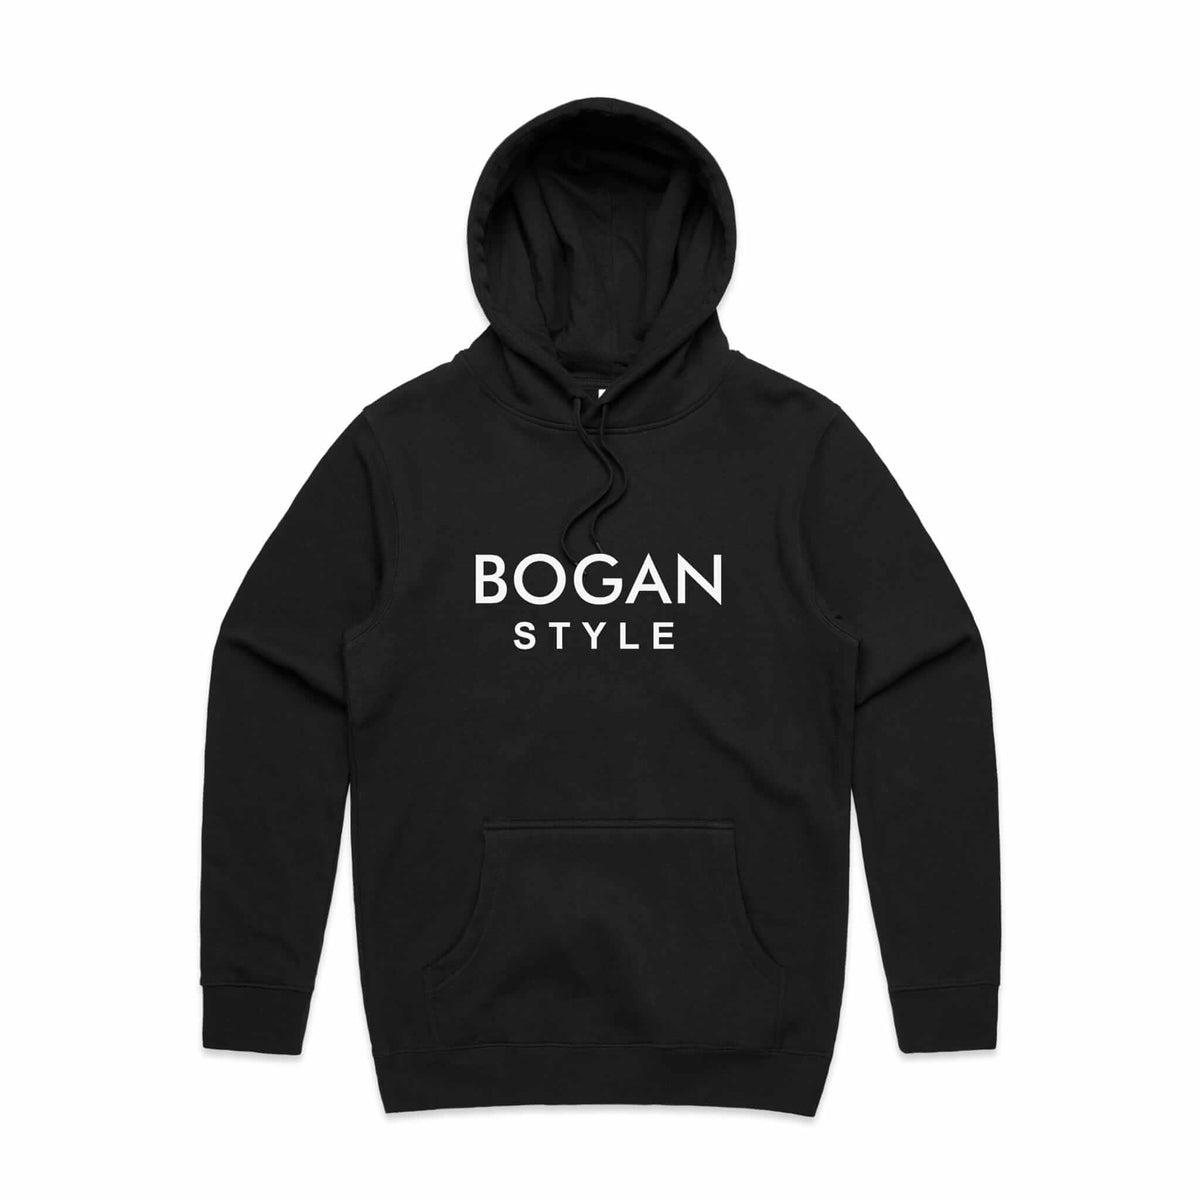 Black hoodie with Bogan Style printed on the front